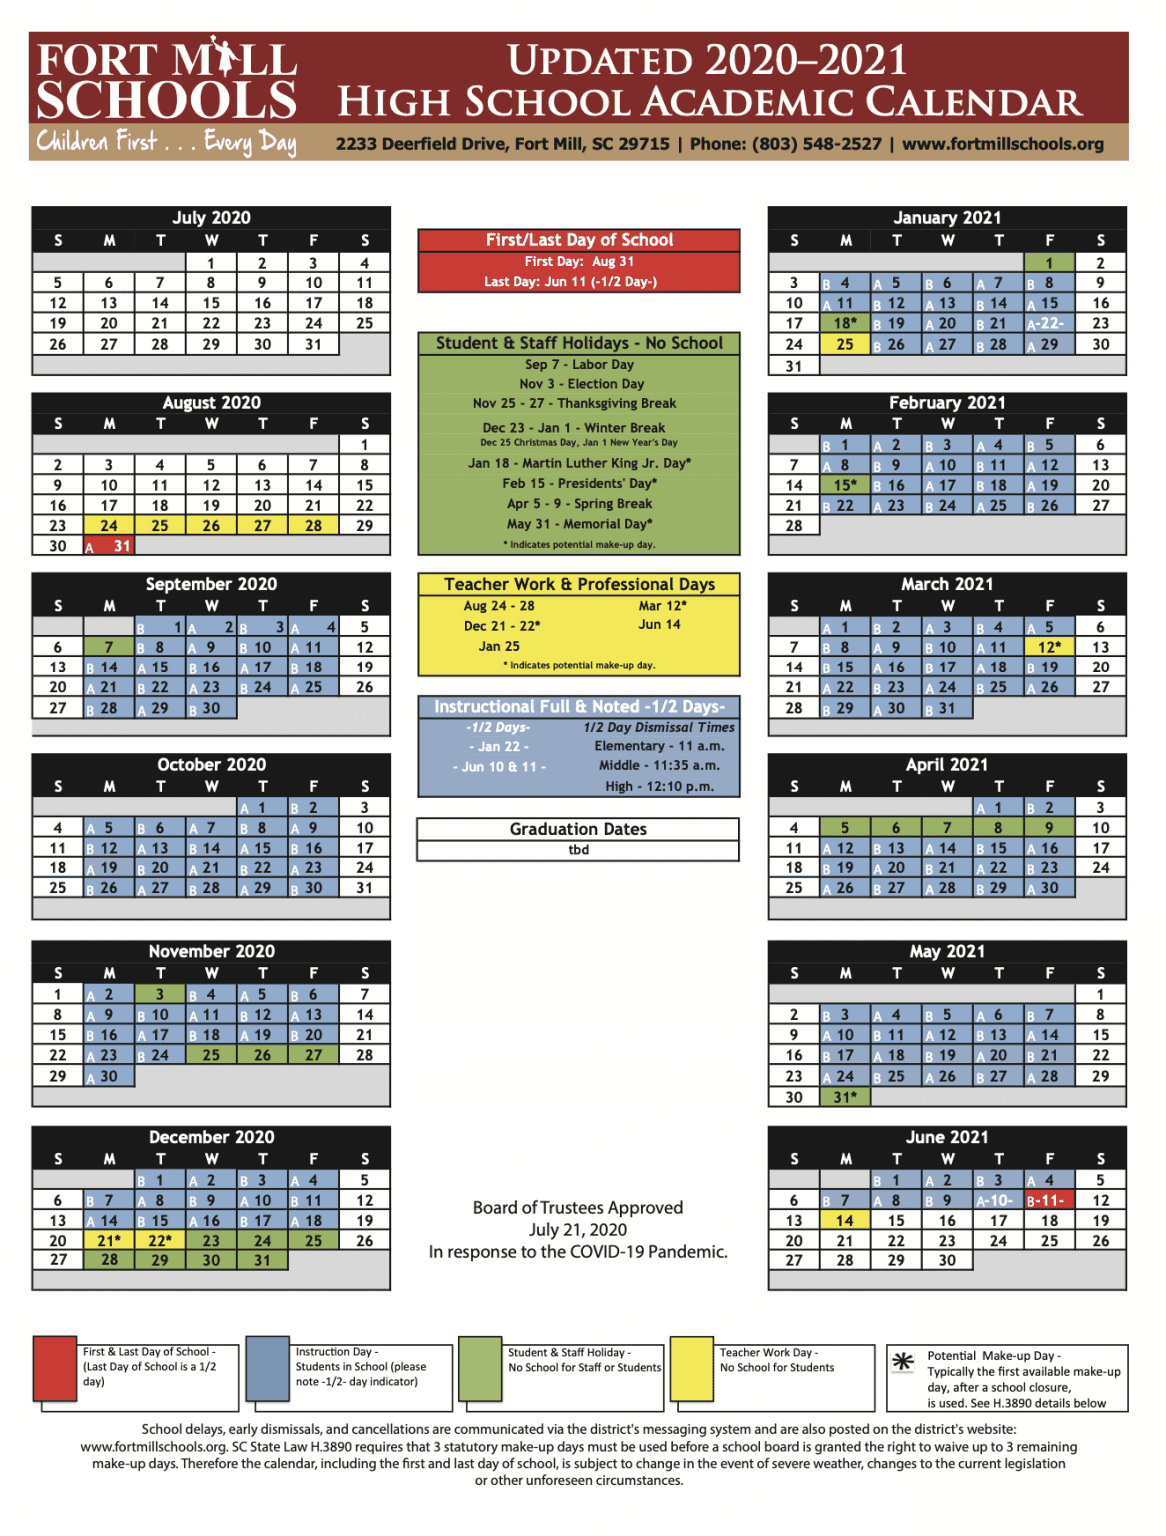 a-b-calendars-are-released-for-elementary-middle-high-schools-in-fort-mill-take-a-look